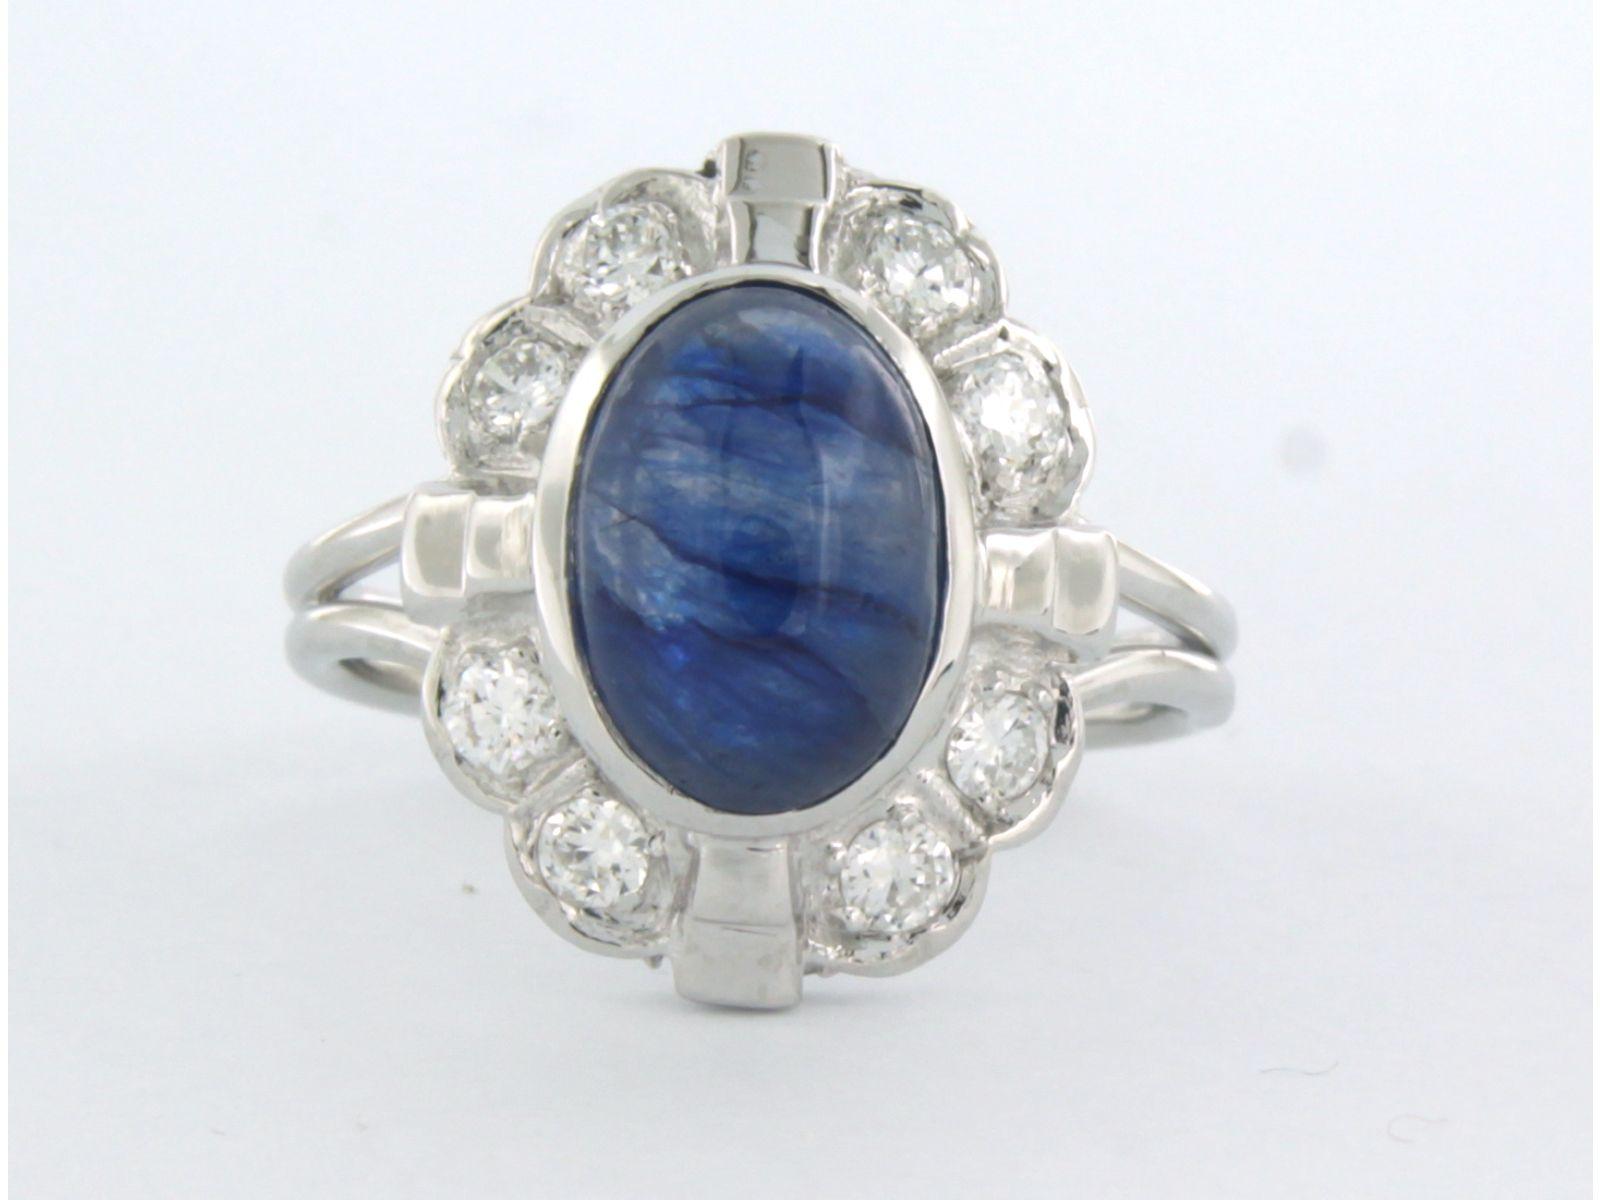 14k white gold cocktail ring set with a central sapphire and an entourage of brilliant cut diamonds. 0.48ct - F/G - VS/SI - ring size U.S. 7.25 - EU. 17.5 (55)

detailed description:

the top of the ring is oval in shape, 1.8 cm by 1.4 cm wide, and